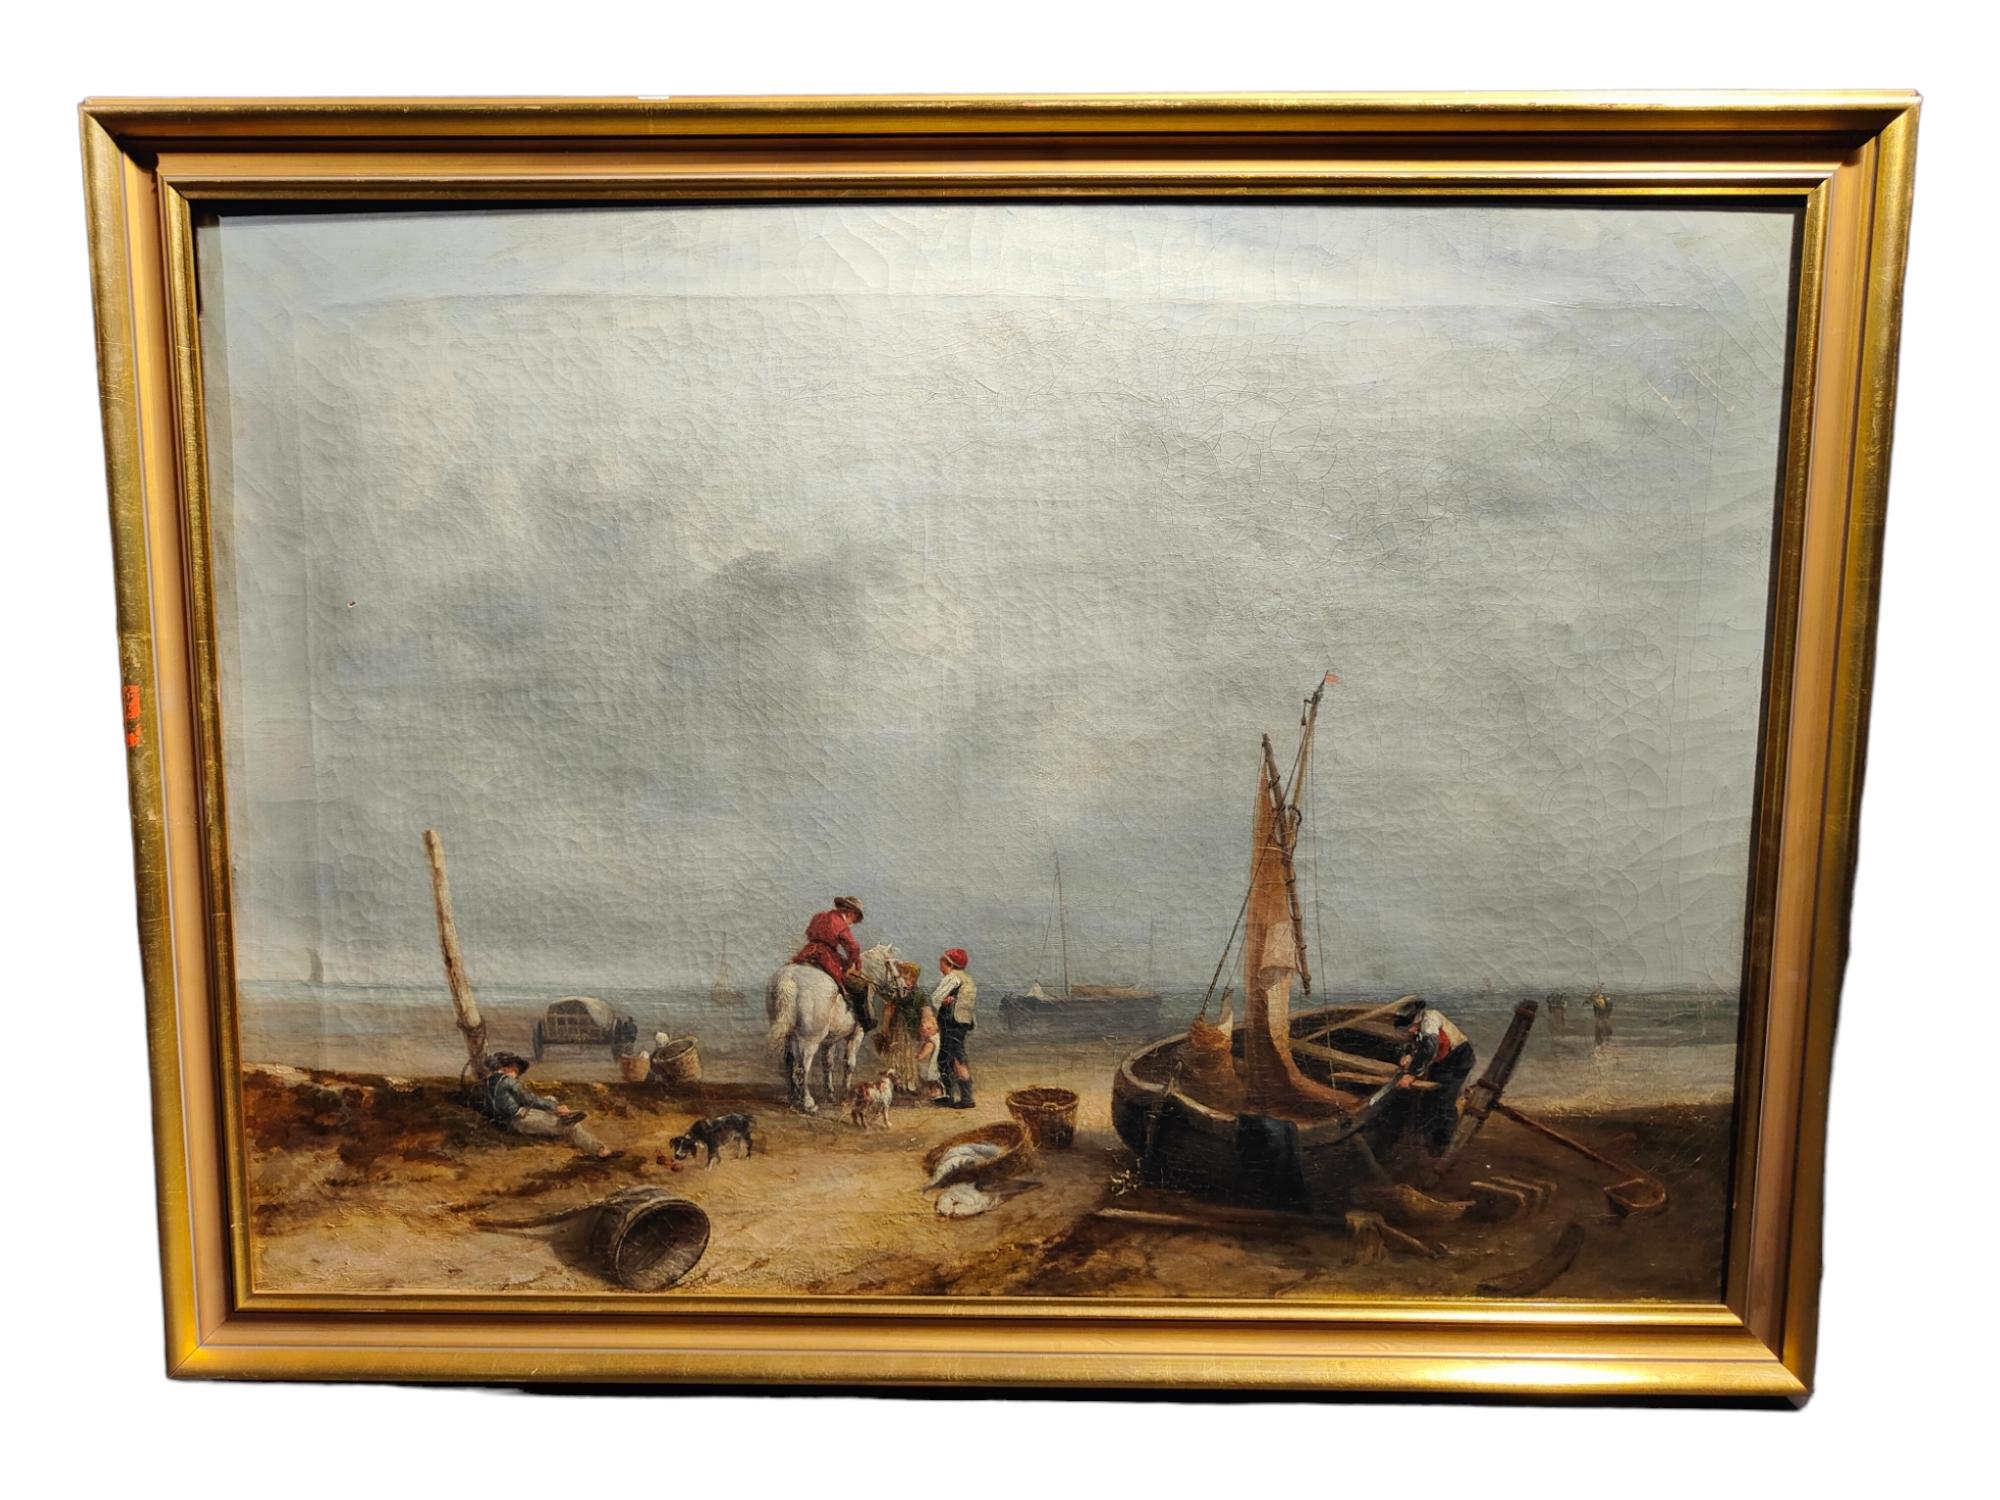 Oil on canvas English school marine scene eighteenth century
On the back part it has a label with a note in ink: coast of Scarborough-England
Elegant marine scene with fishermen and buyers. The characters are dressed in clothing of the time.